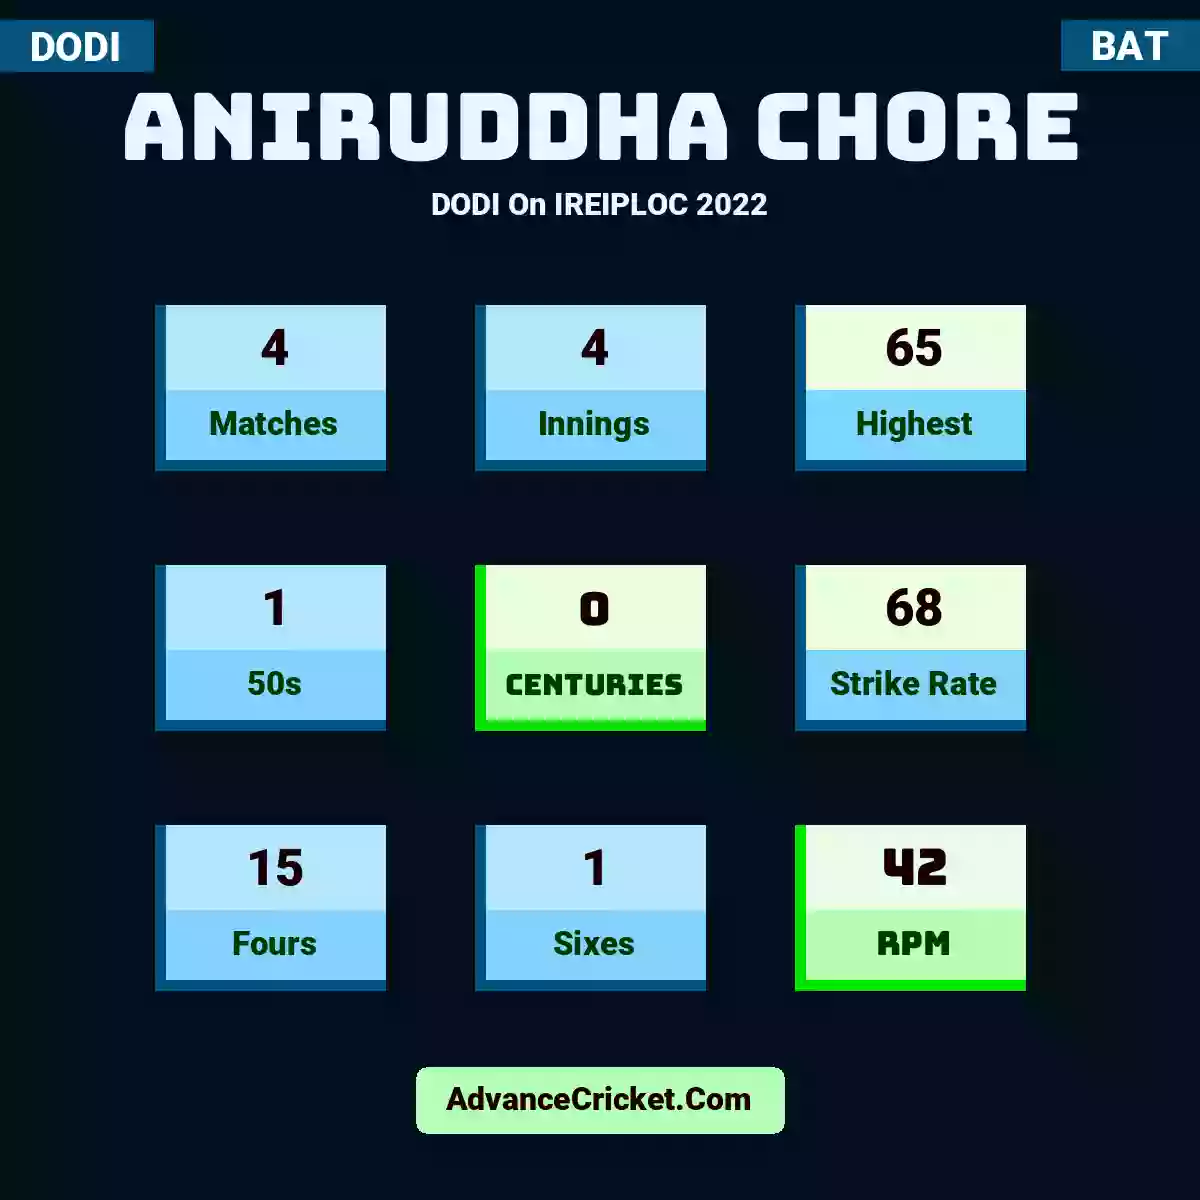 Aniruddha Chore DODI  On IREIPLOC 2022, Aniruddha Chore played 4 matches, scored 65 runs as highest, 1 half-centuries, and 0 centuries, with a strike rate of 68. A.Chore hit 15 fours and 1 sixes, with an RPM of 42.